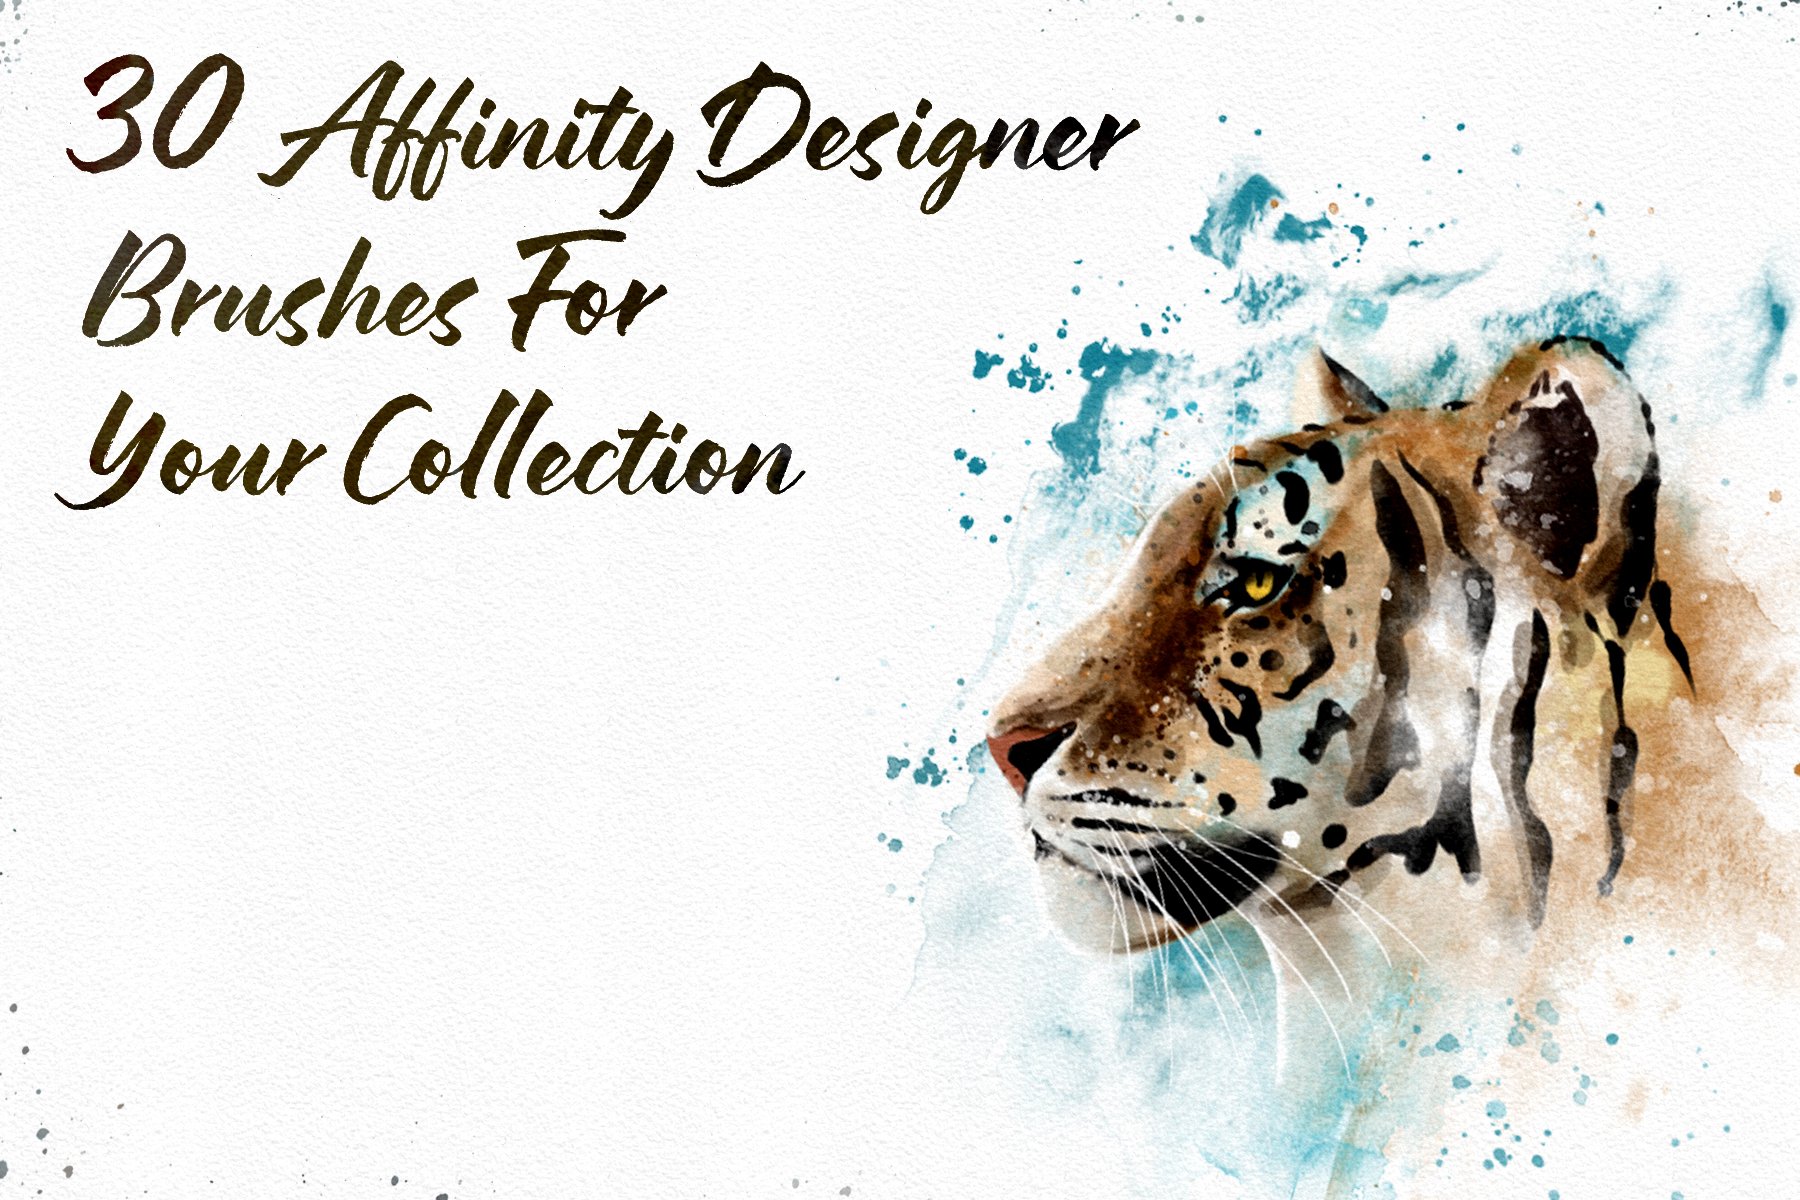 https://designcuts.b-cdn.net/wp-content/uploads/2020/06/Cover-1800x1200-30-Affinity-Designer-Brushes-for-Your-Collection-.jpg